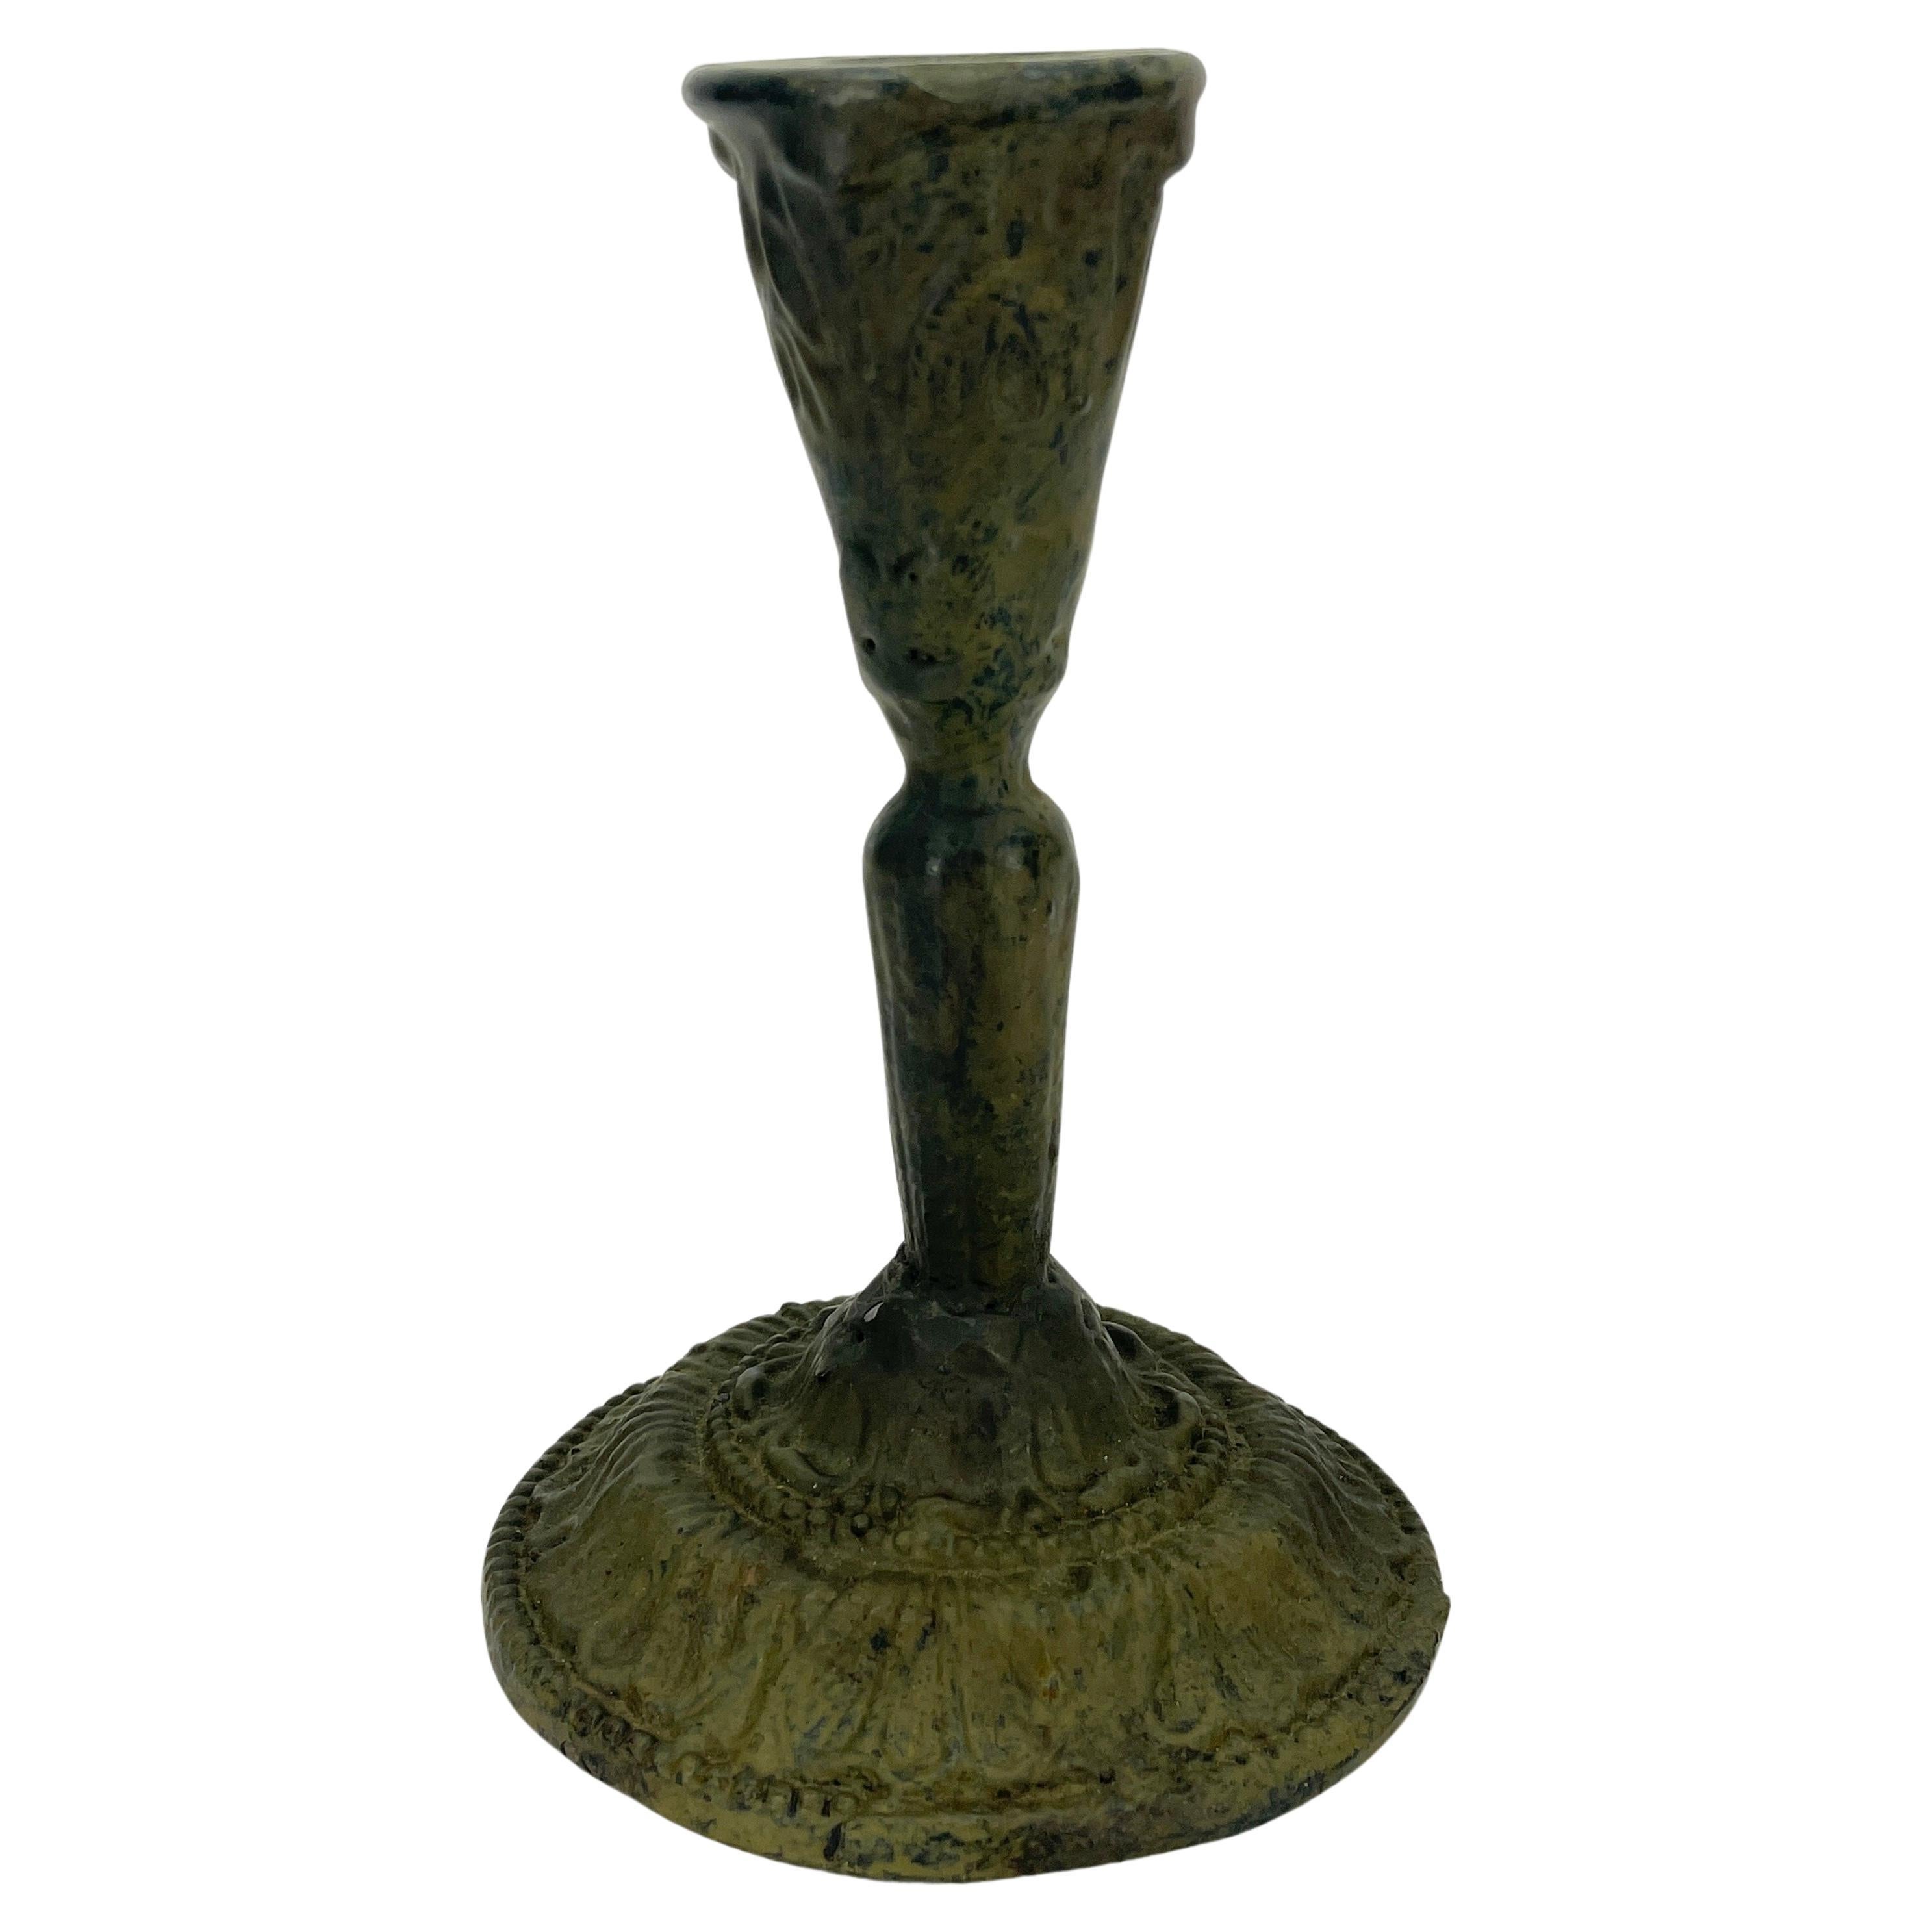 Single French Cast Iron Candlestick In The Original Green Painted Patina, 19th Century  